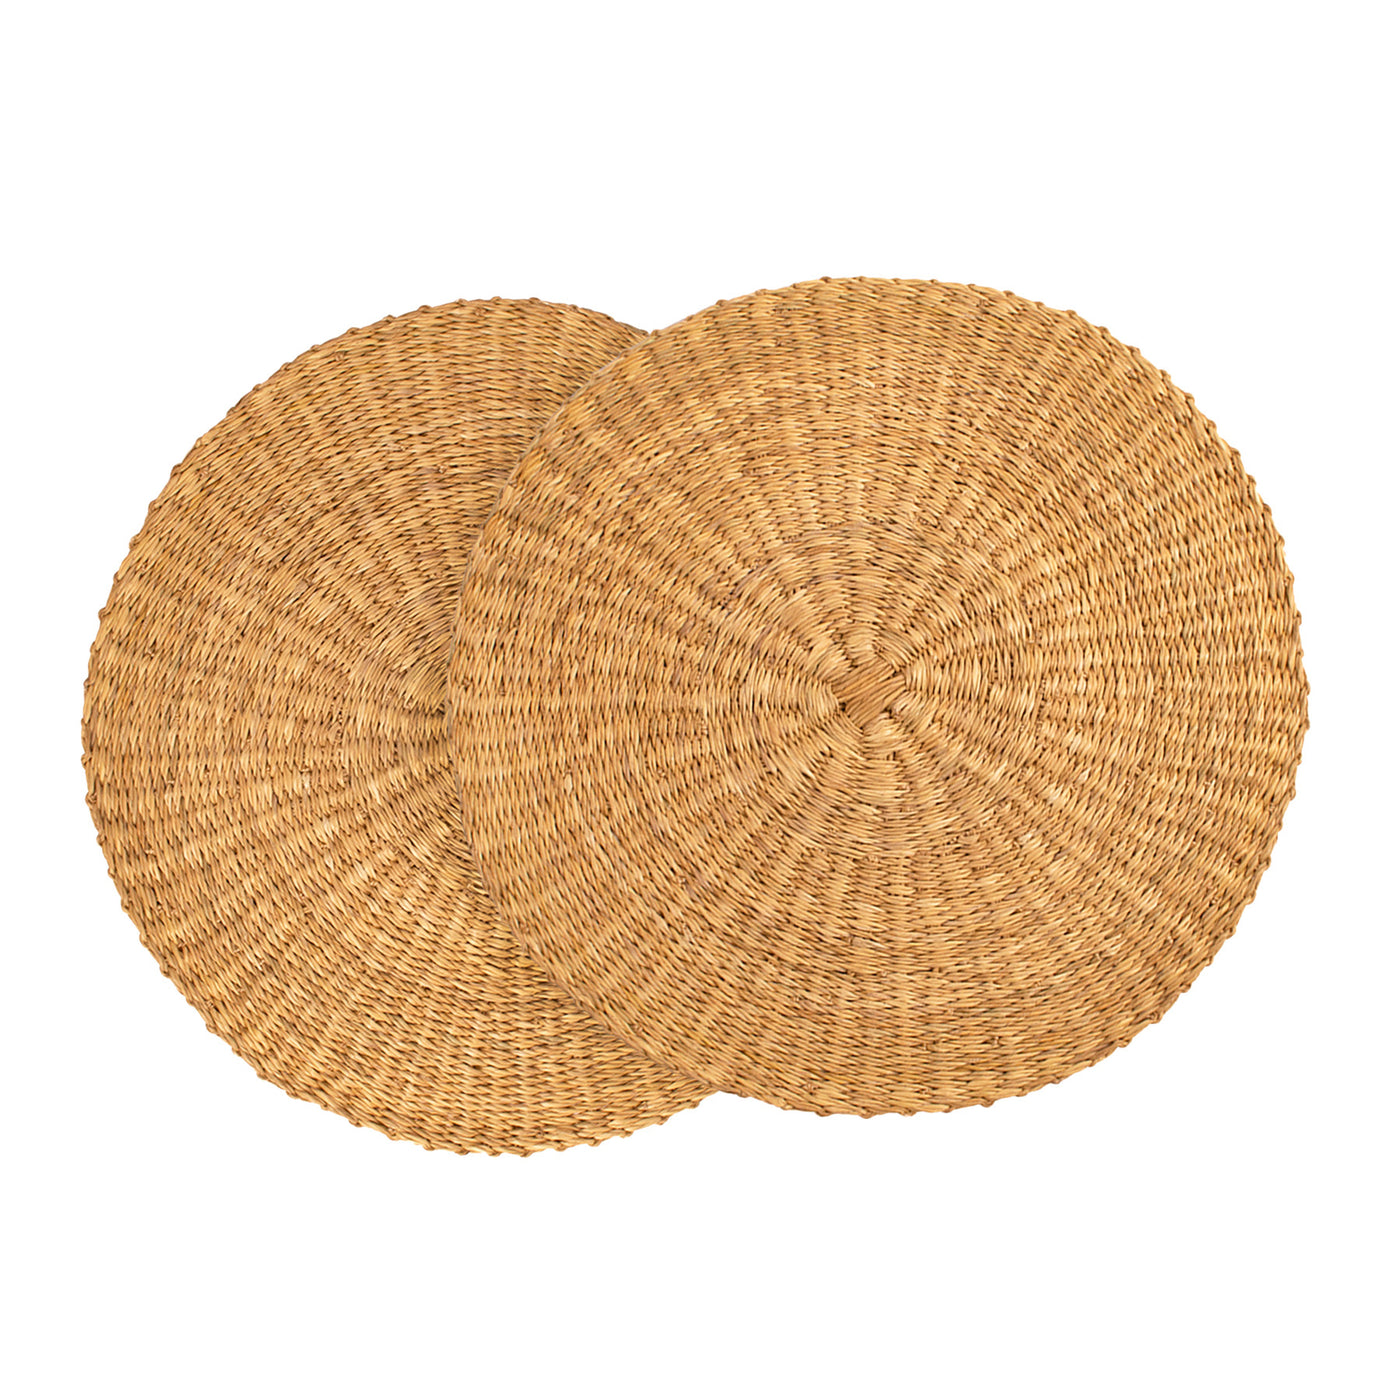 Earthen Craft Placemats - 15" Natural Rounds, Set of 2